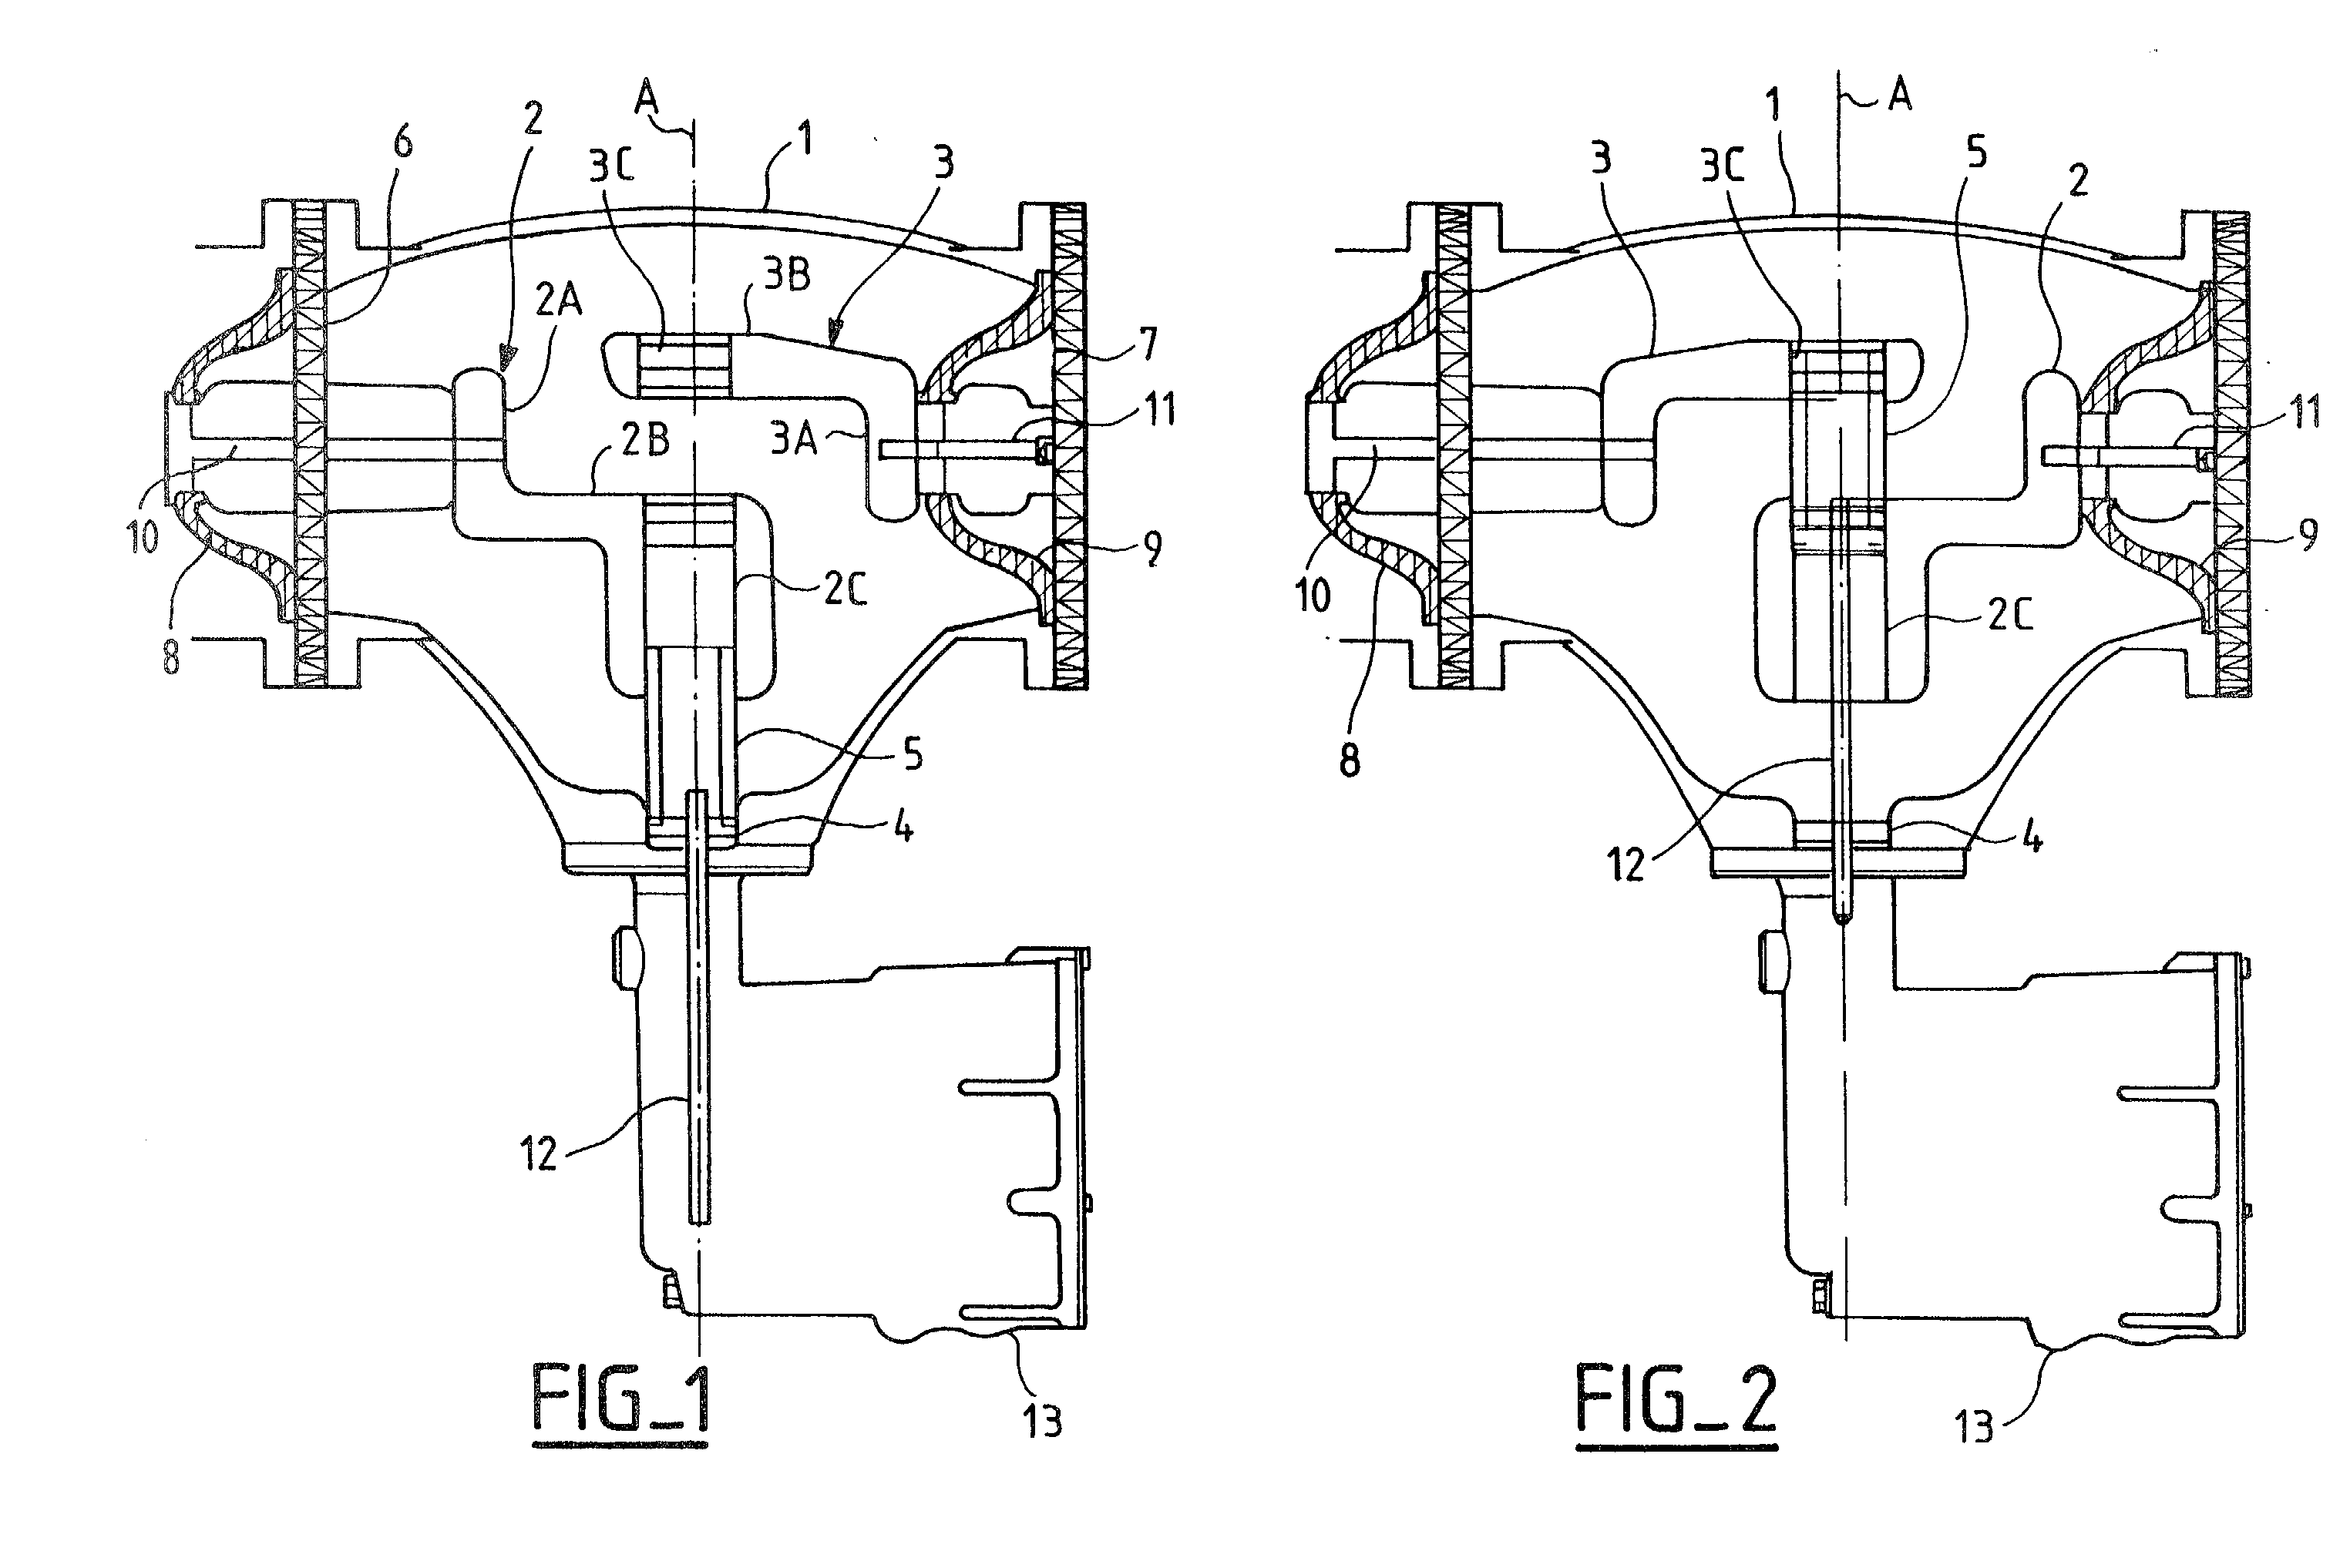 Three-position electrical switch having a switching element that is movable in axial translation